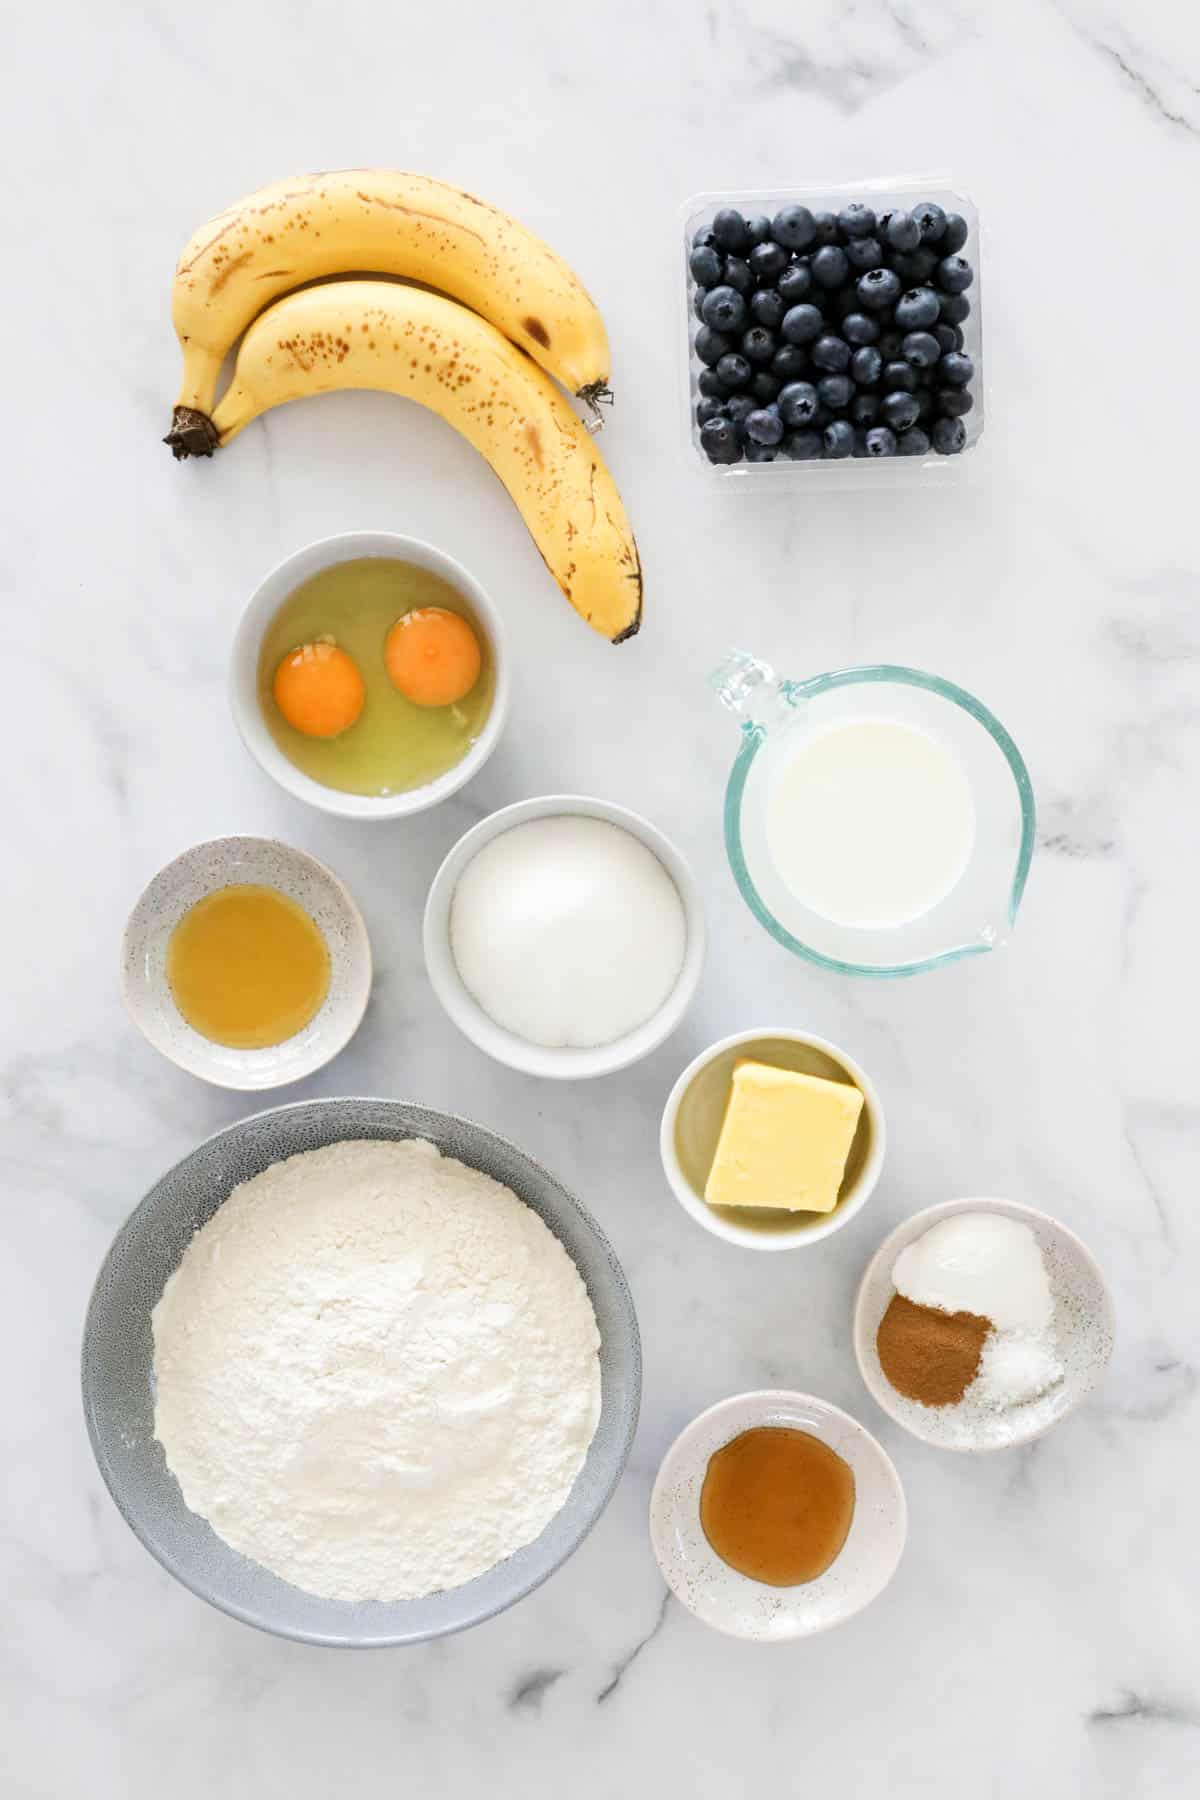 Ingredients for making banana blueberry muffins in bowls.